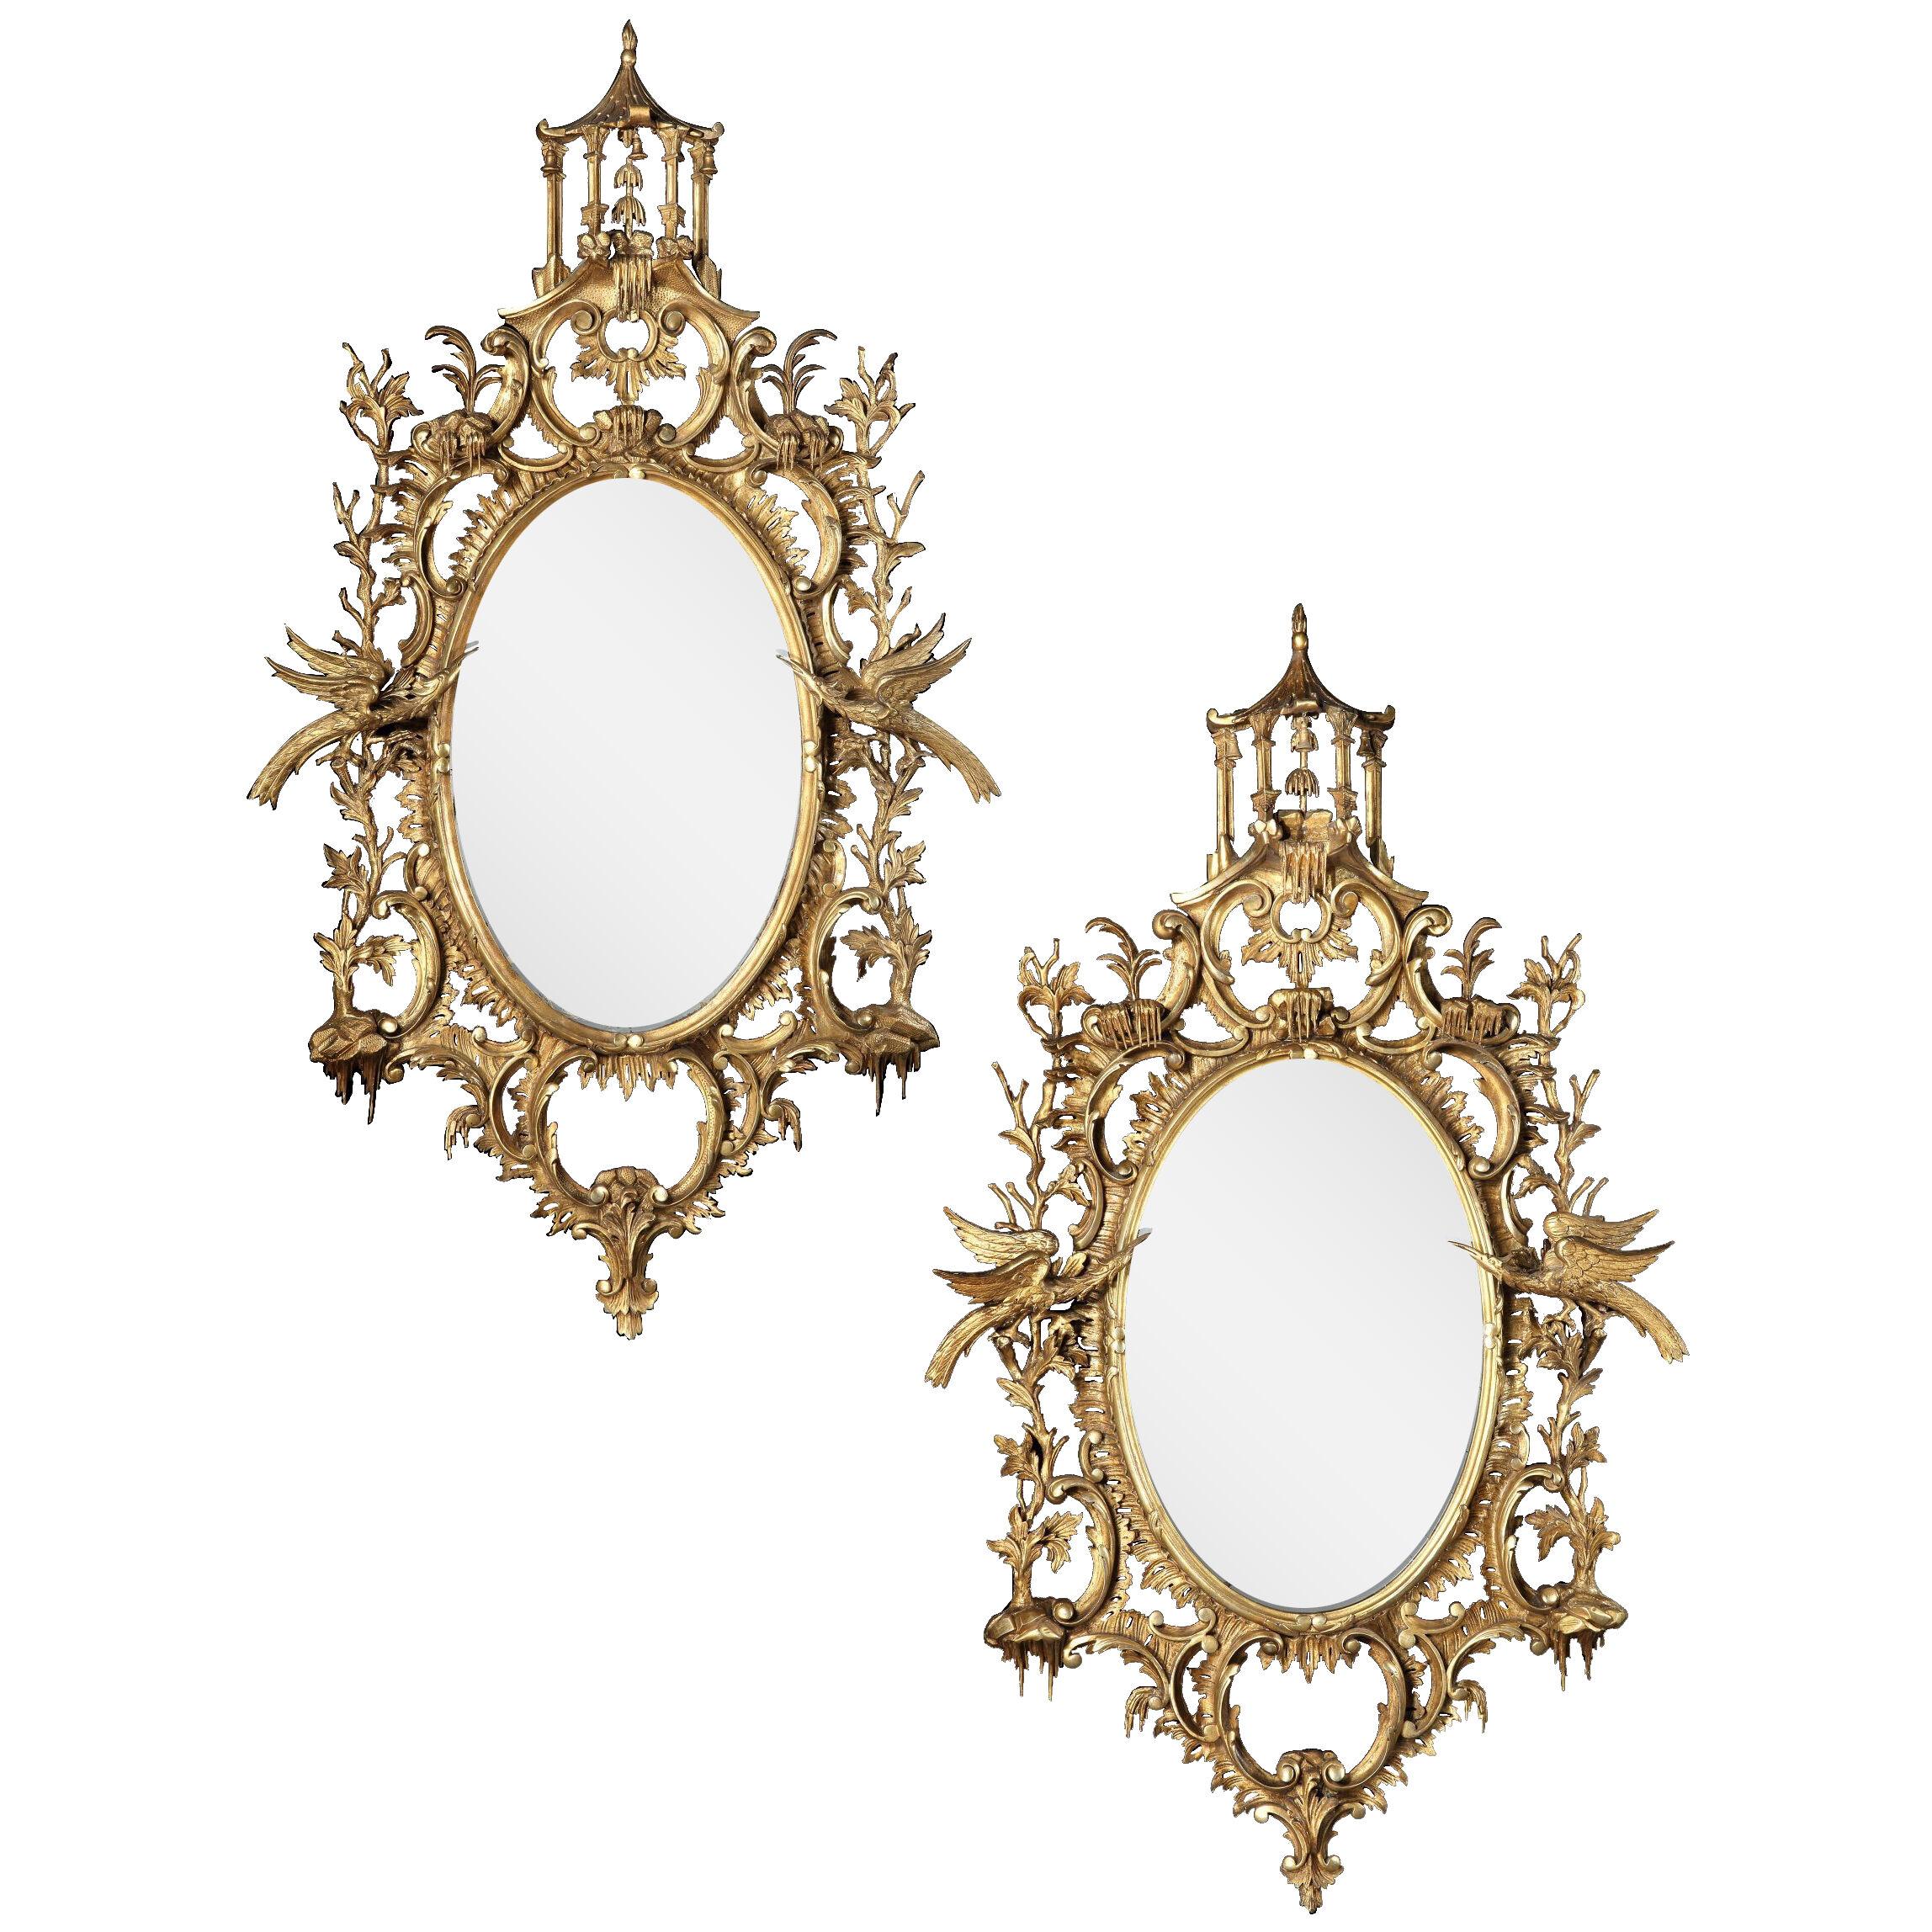 Pair of Large Giltwood Mirrors in the Chinese Chippendale Style